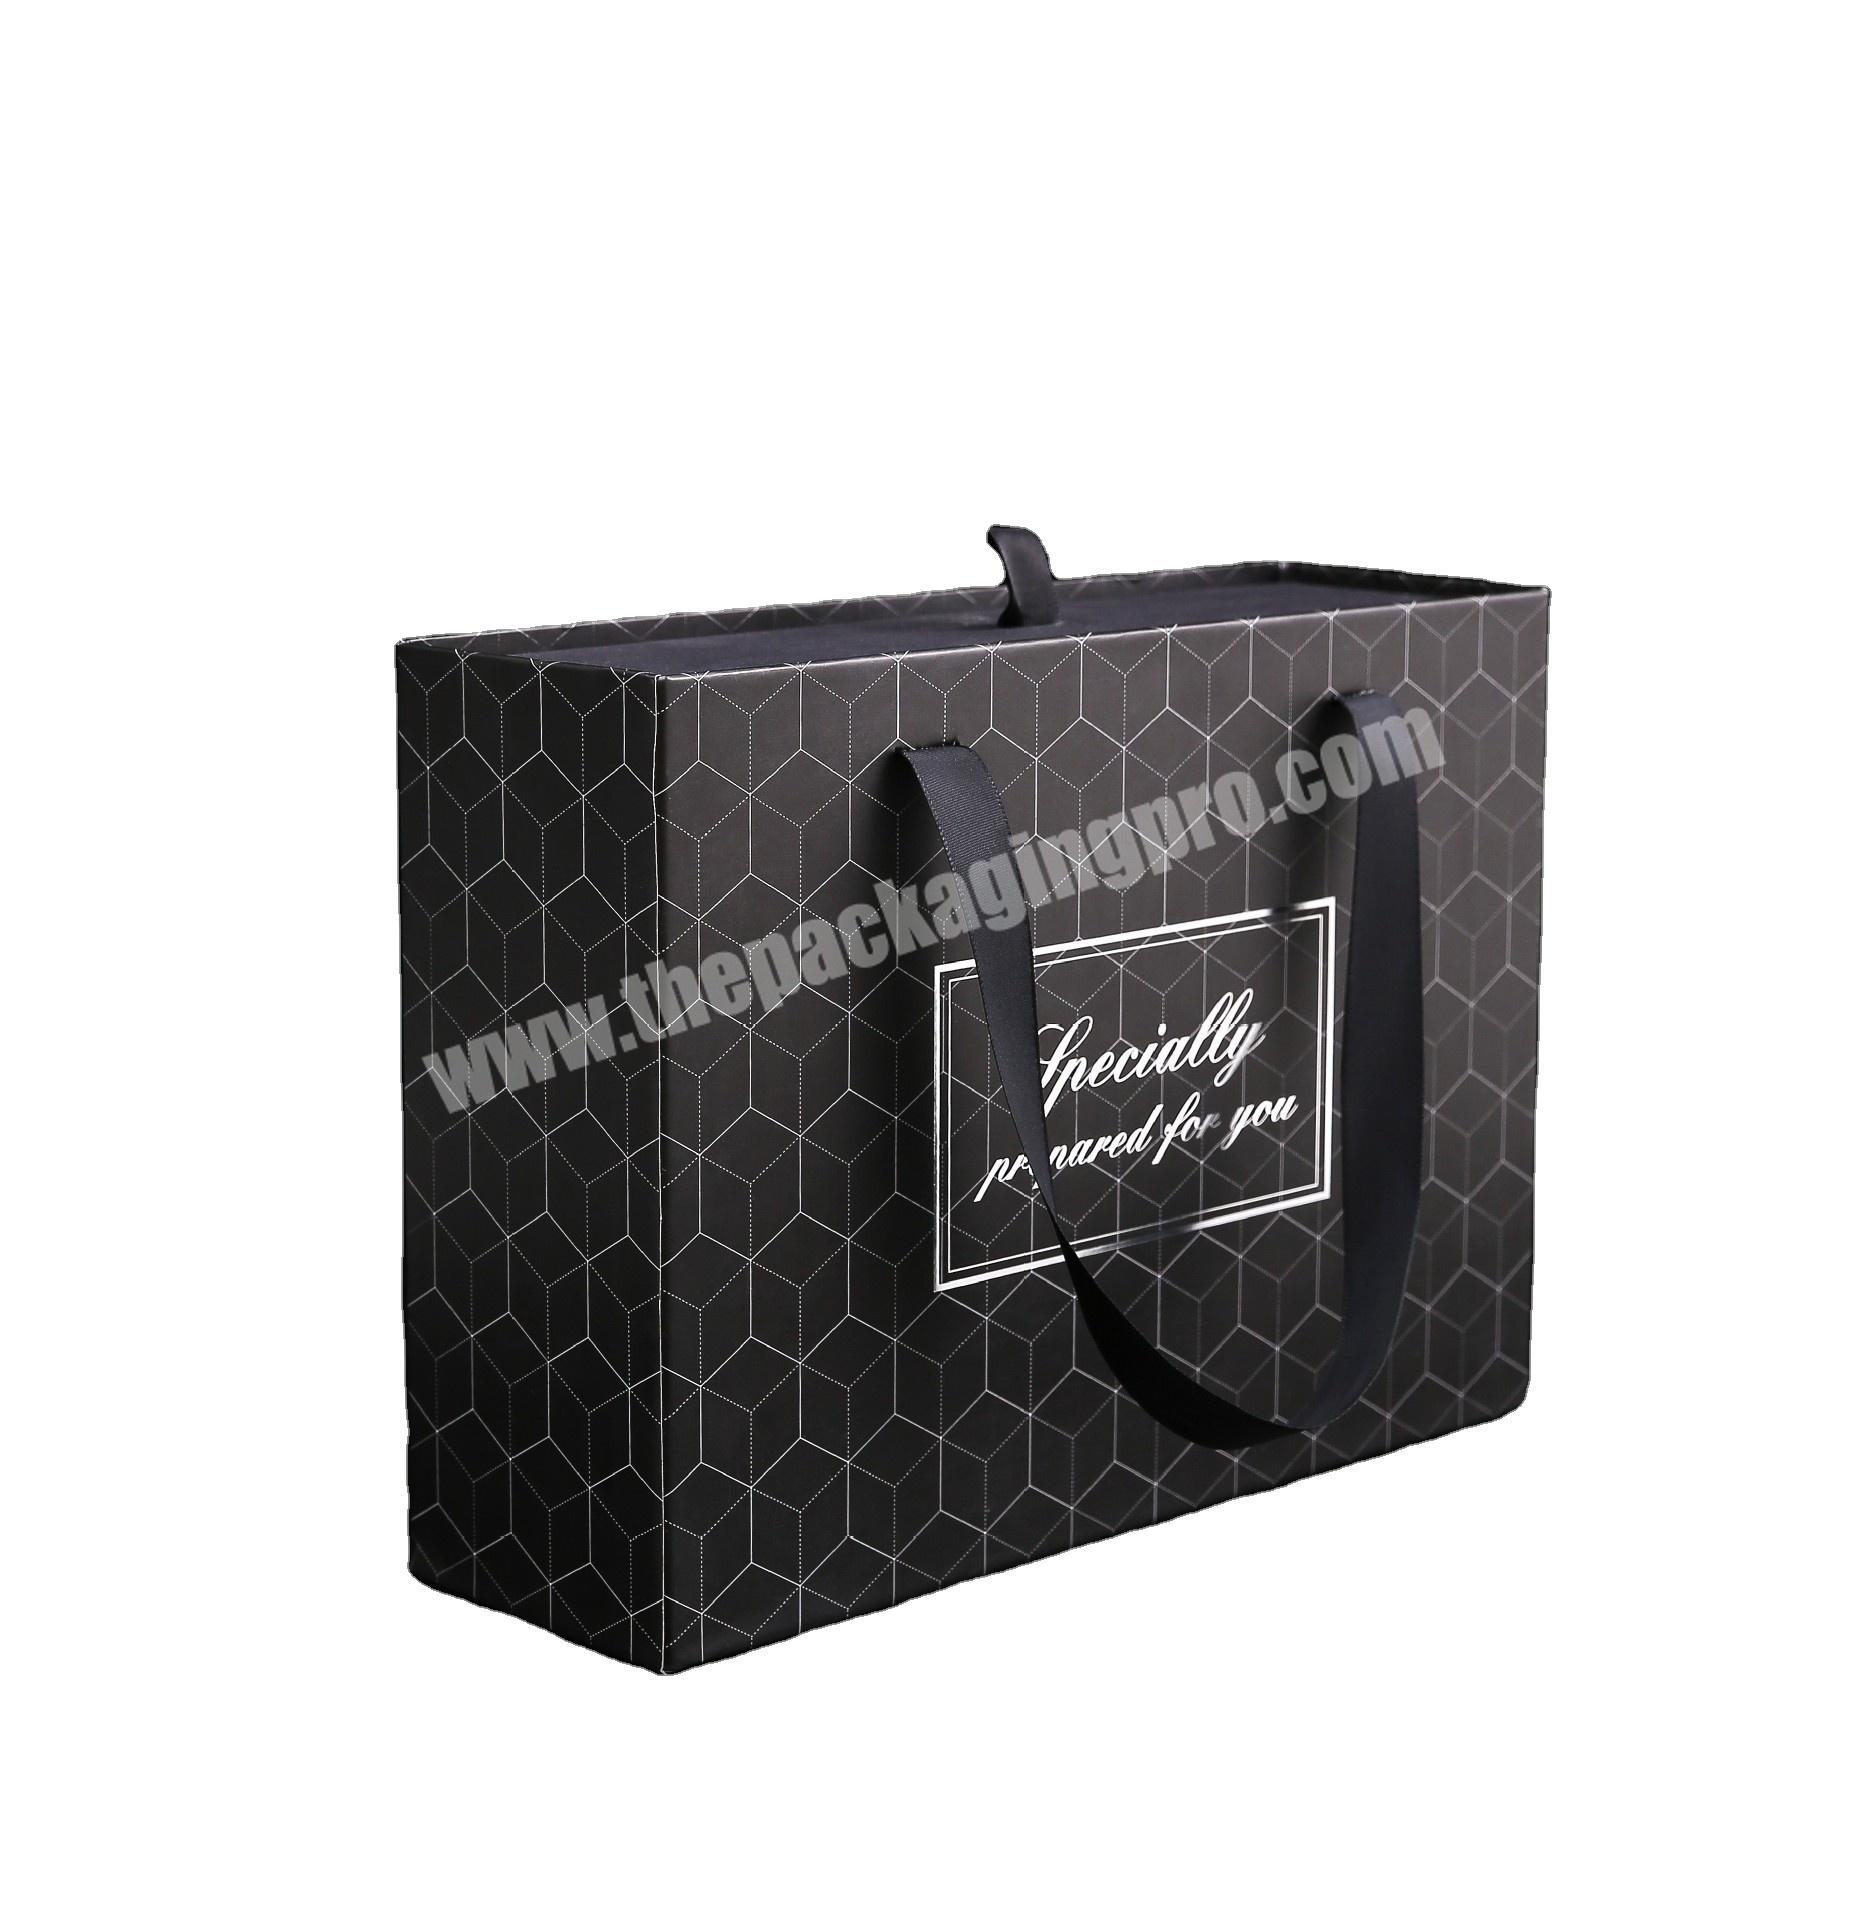 High-quality push-pull packaging for luxury apparel packaging